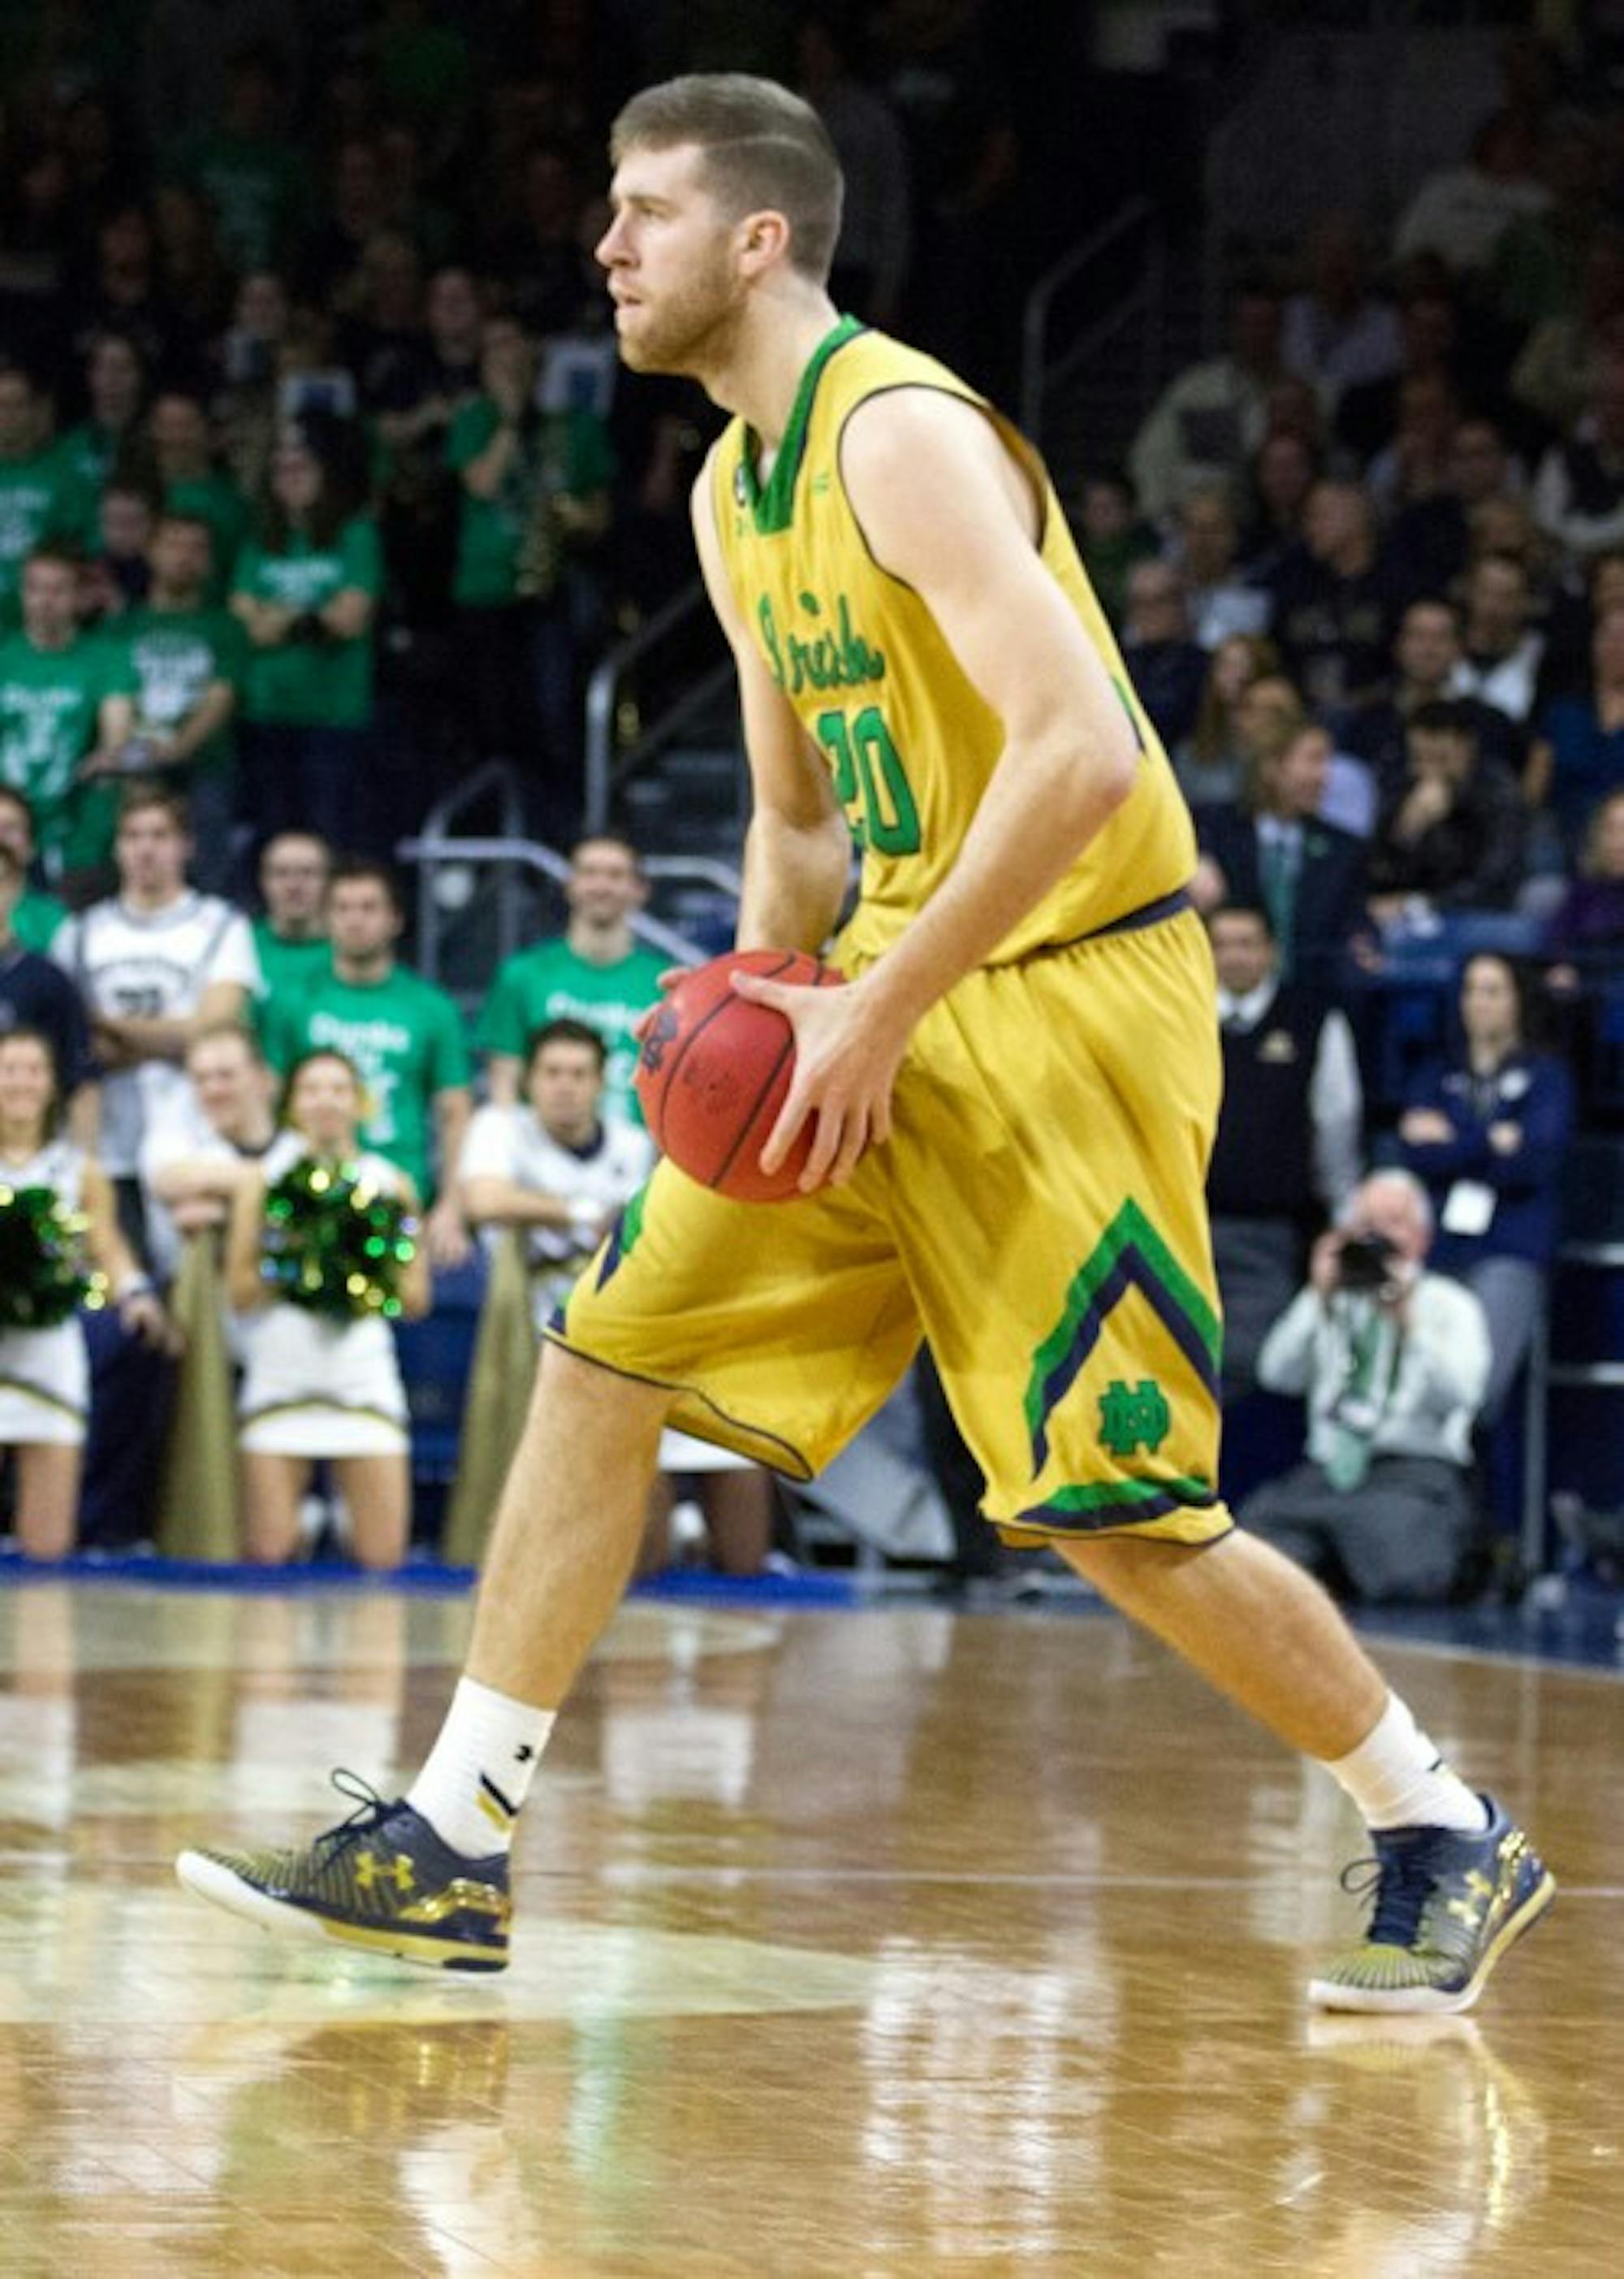 Irish senior forward A.J. Burgett looks to pass during Notre Dame’s 76-49 win over Boston College at Purcell Pavilion on Jan. 23. In his first start in nearly two years, Burgett scored 14 points Sunday.